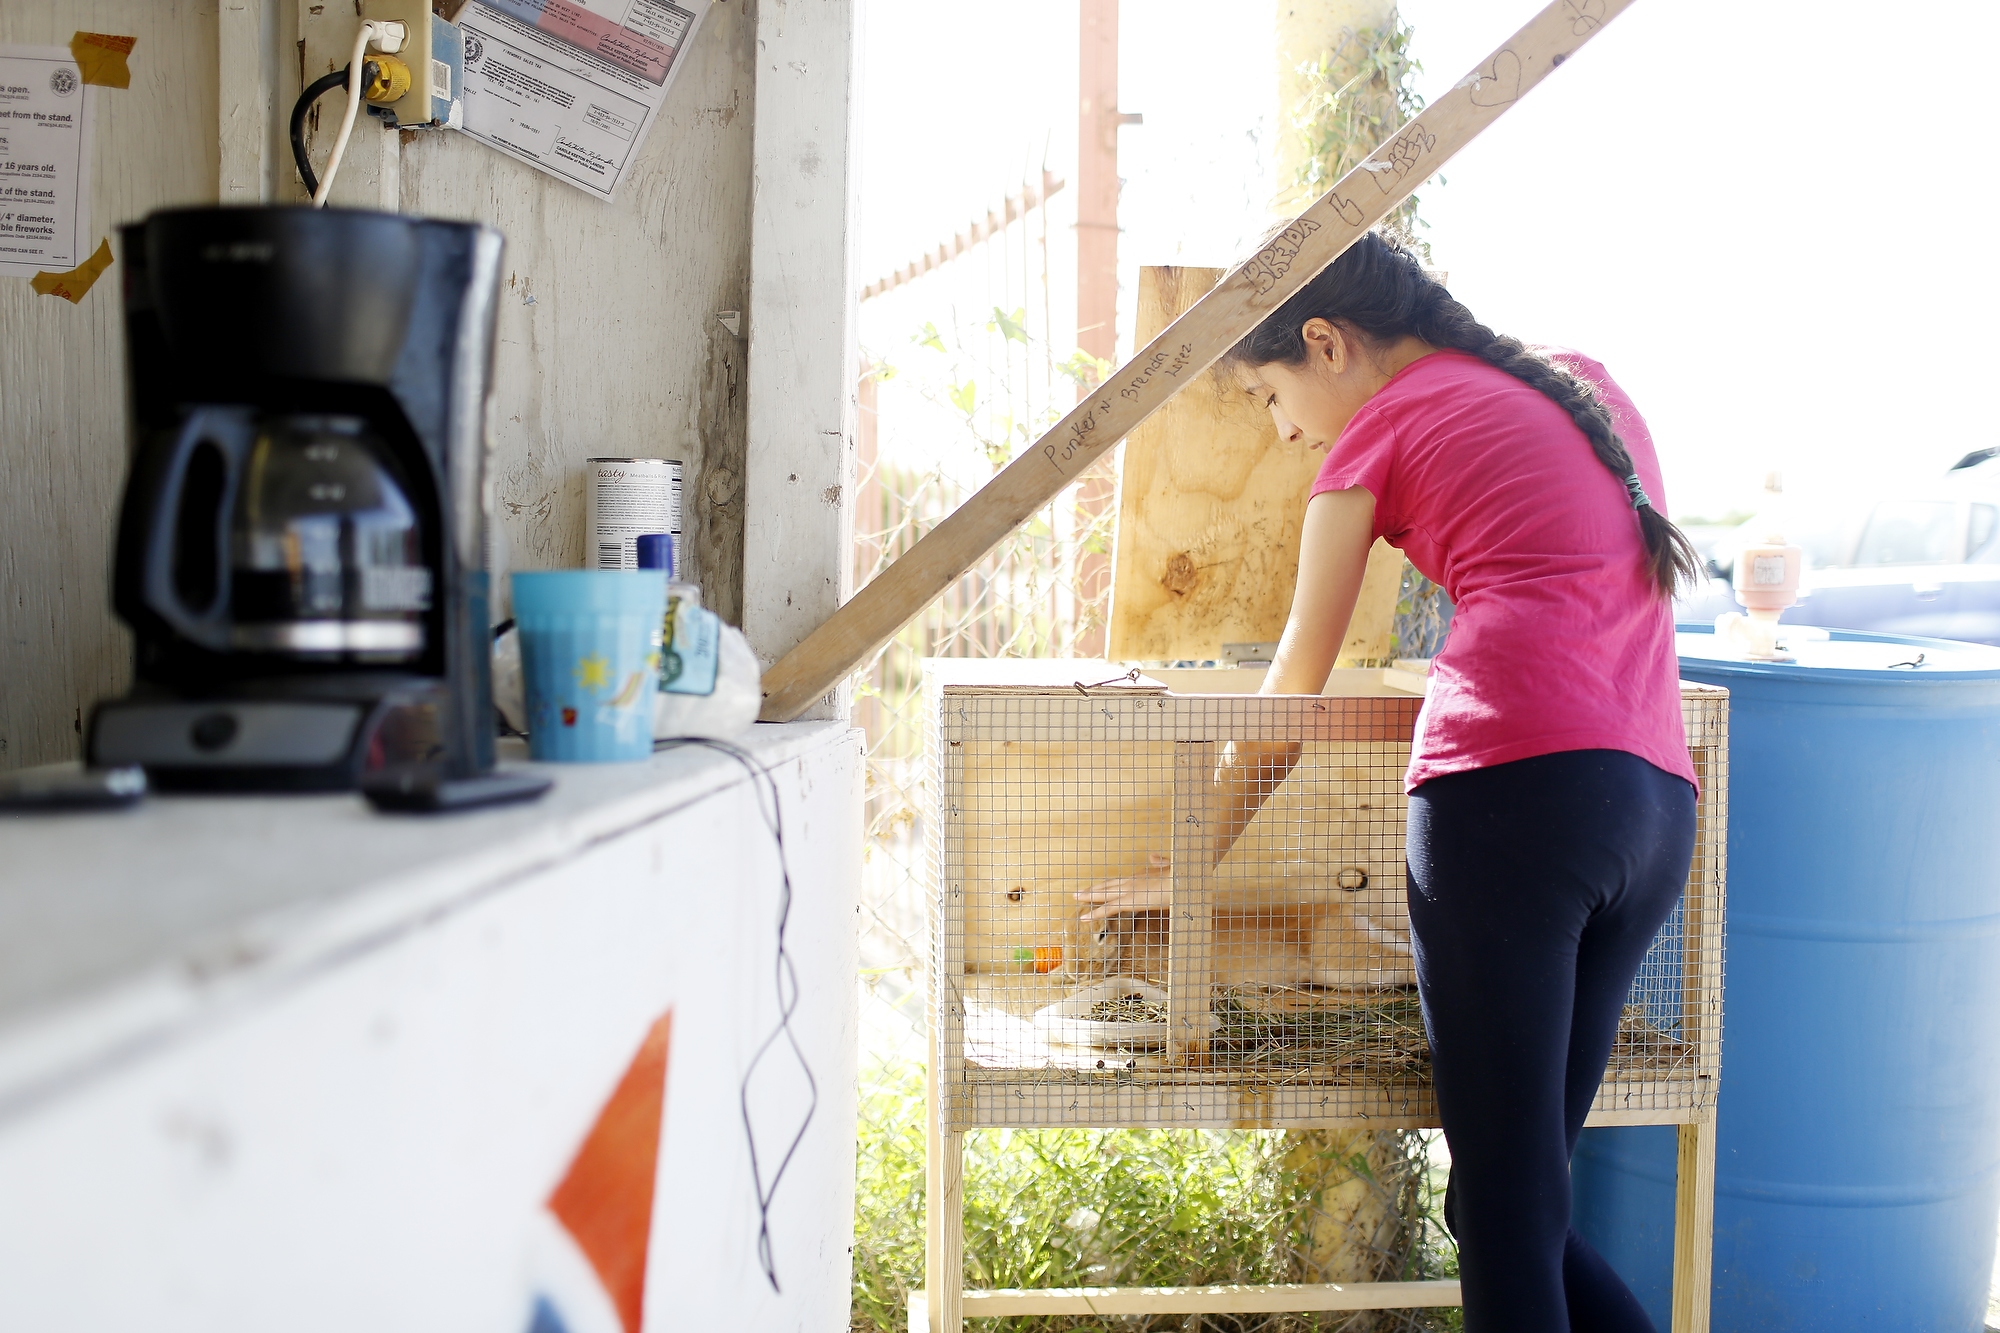 Briana pets her pet rabbit who is living with the family at the fireworks stand in Hidalgo, Texas on July 1, 2014.